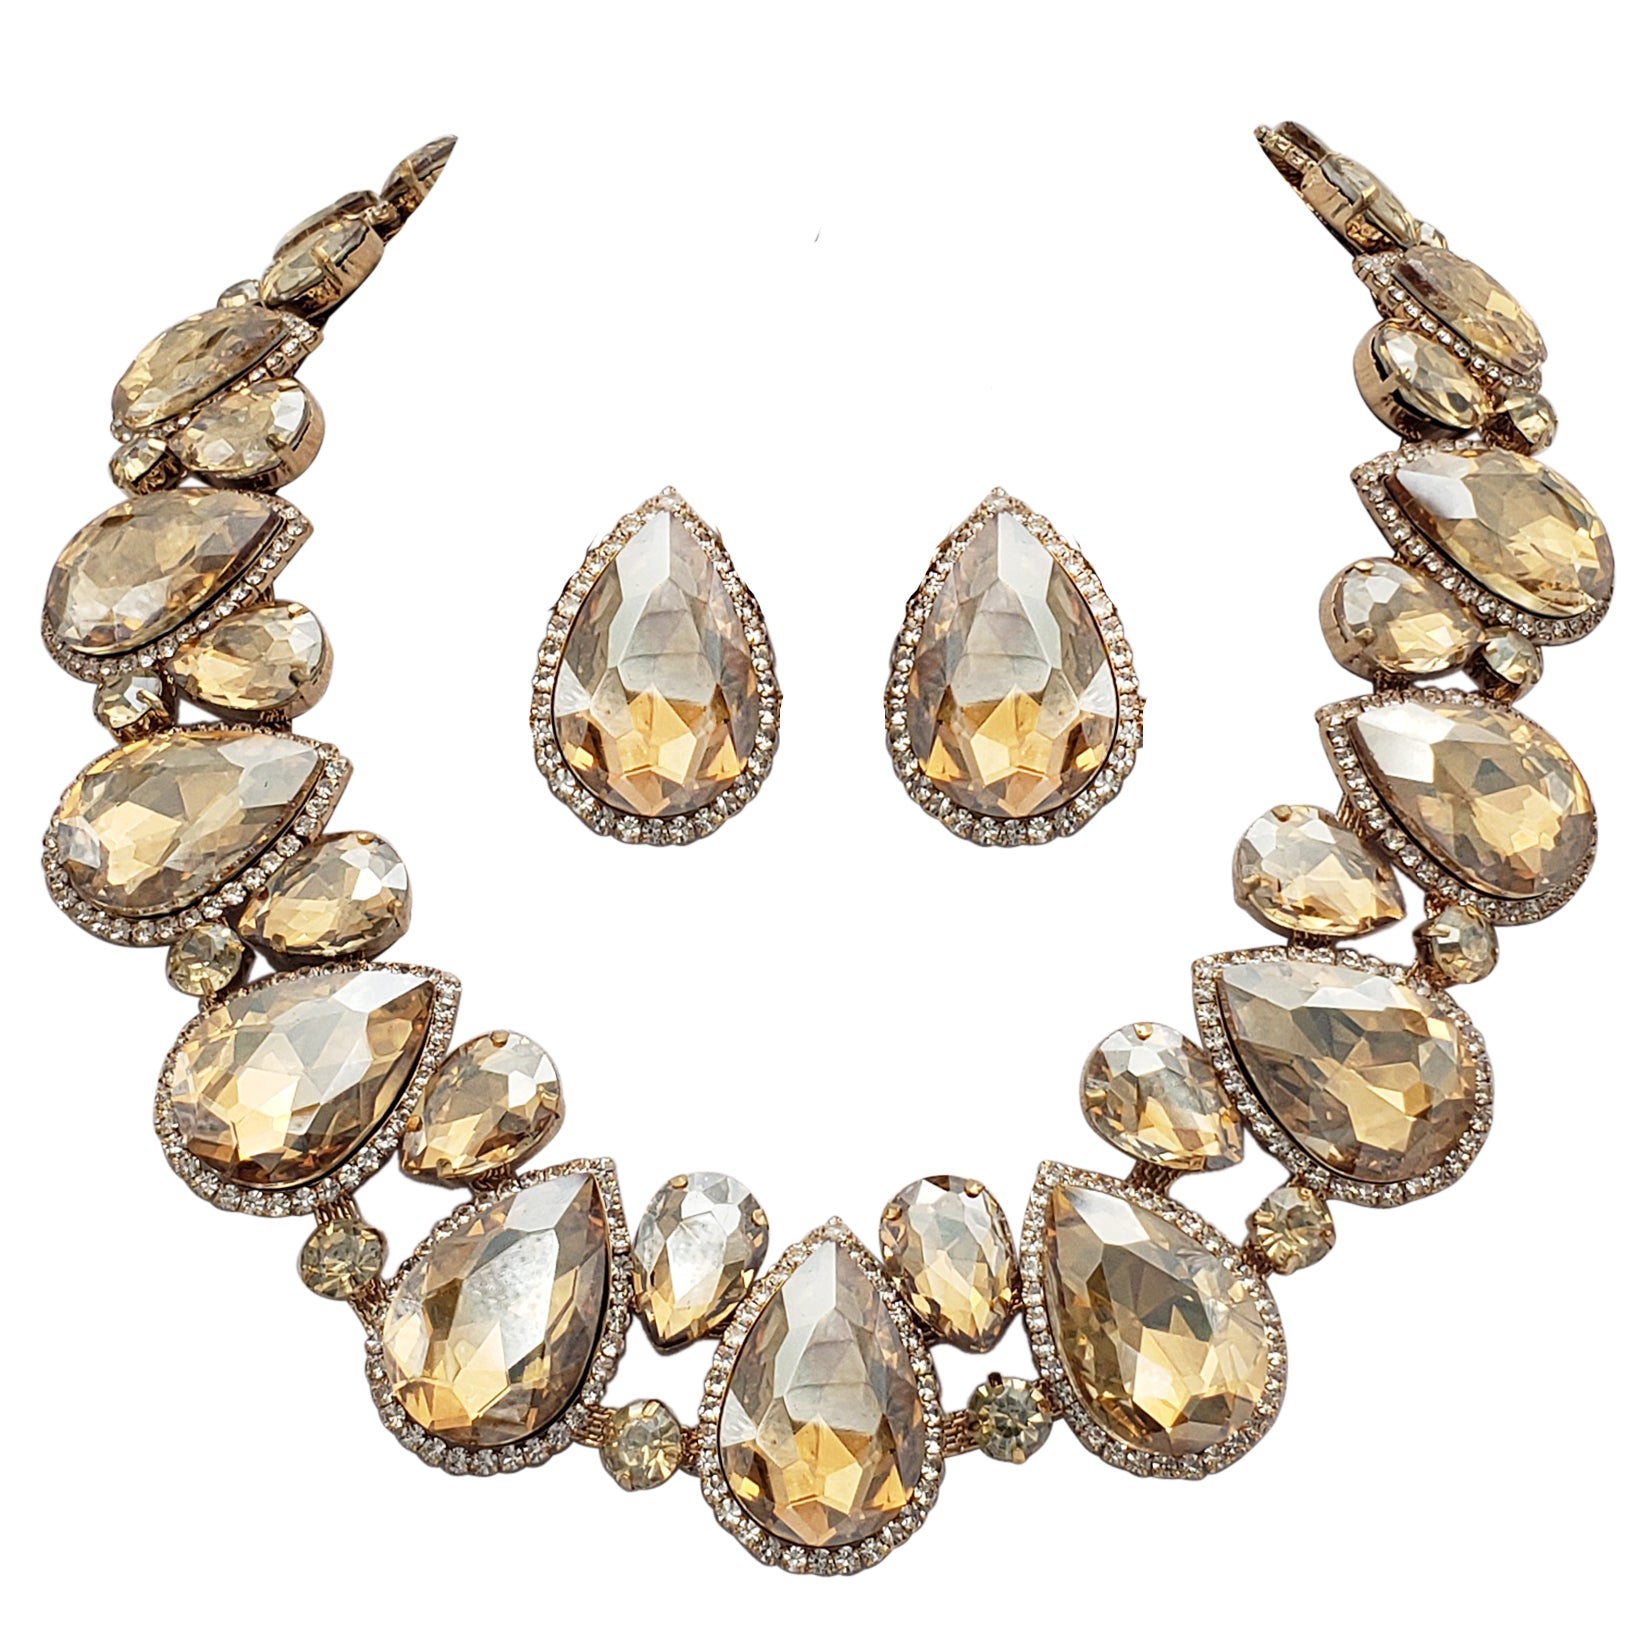 Stunning And Colorful Teardrop Halo Crystal Rhinestone Statement Necklace Earrings Bridal Gift Set, 18"+4" Extender (Light Topaz Crystal Gold Tone)